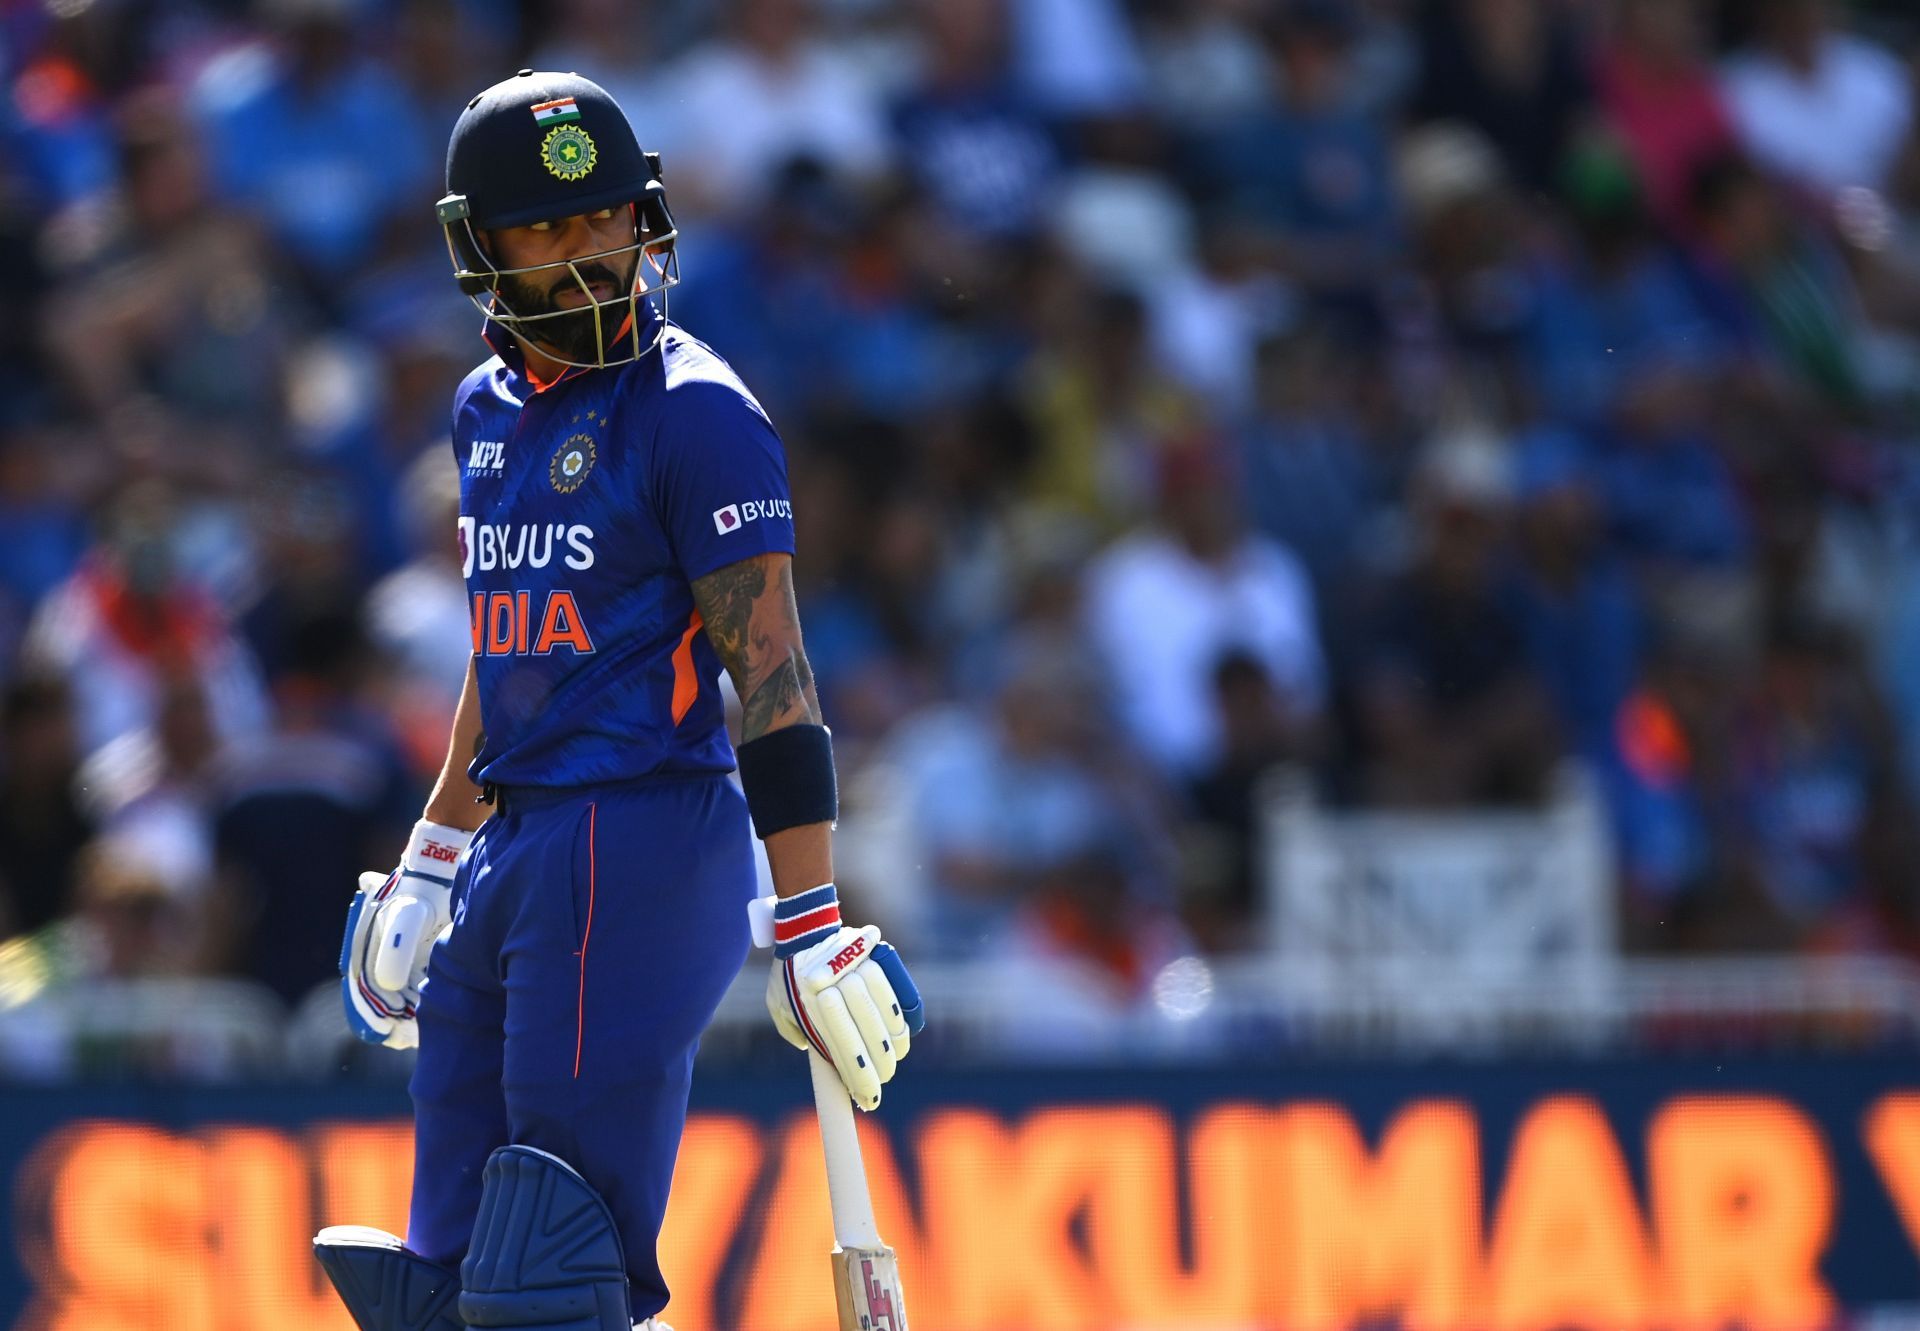 Virat Kohli is likely to bat at No. 3 for Team India in the Asia Cup